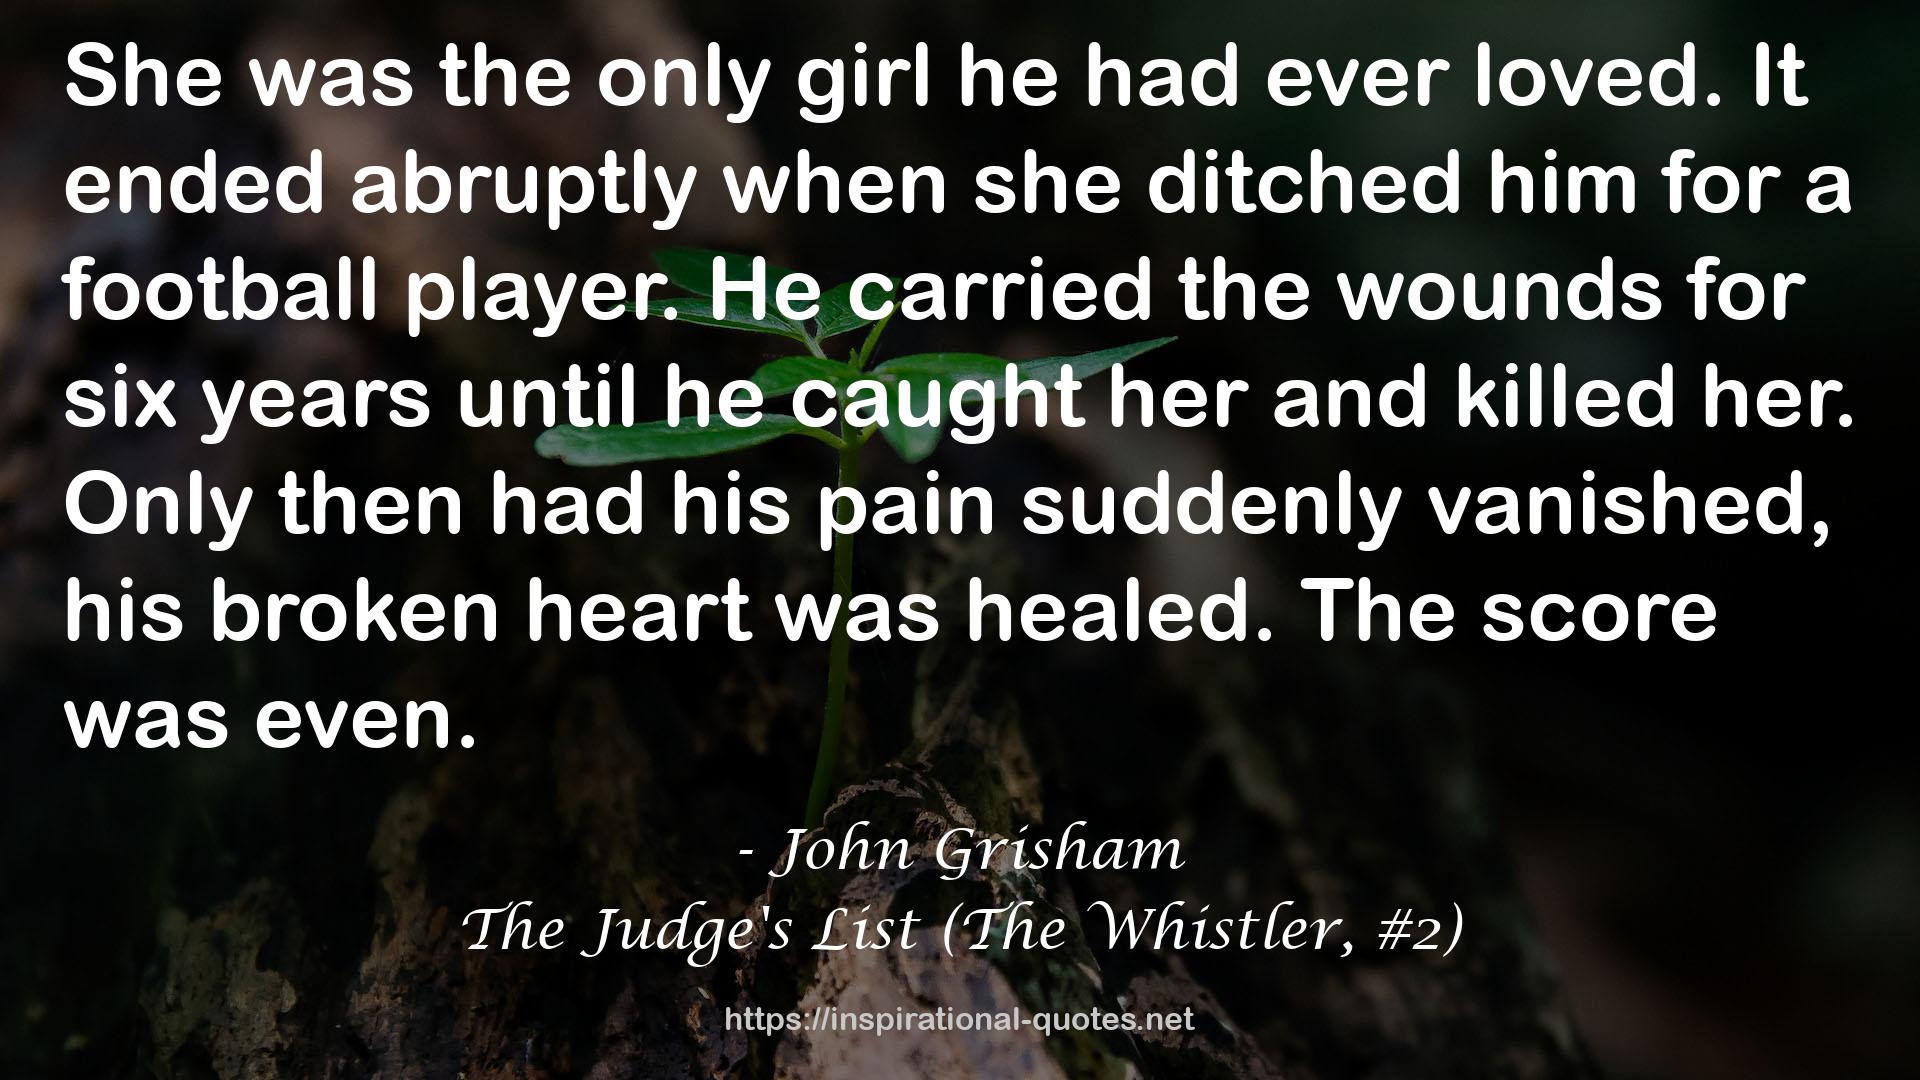 The Judge's List (The Whistler, #2) QUOTES